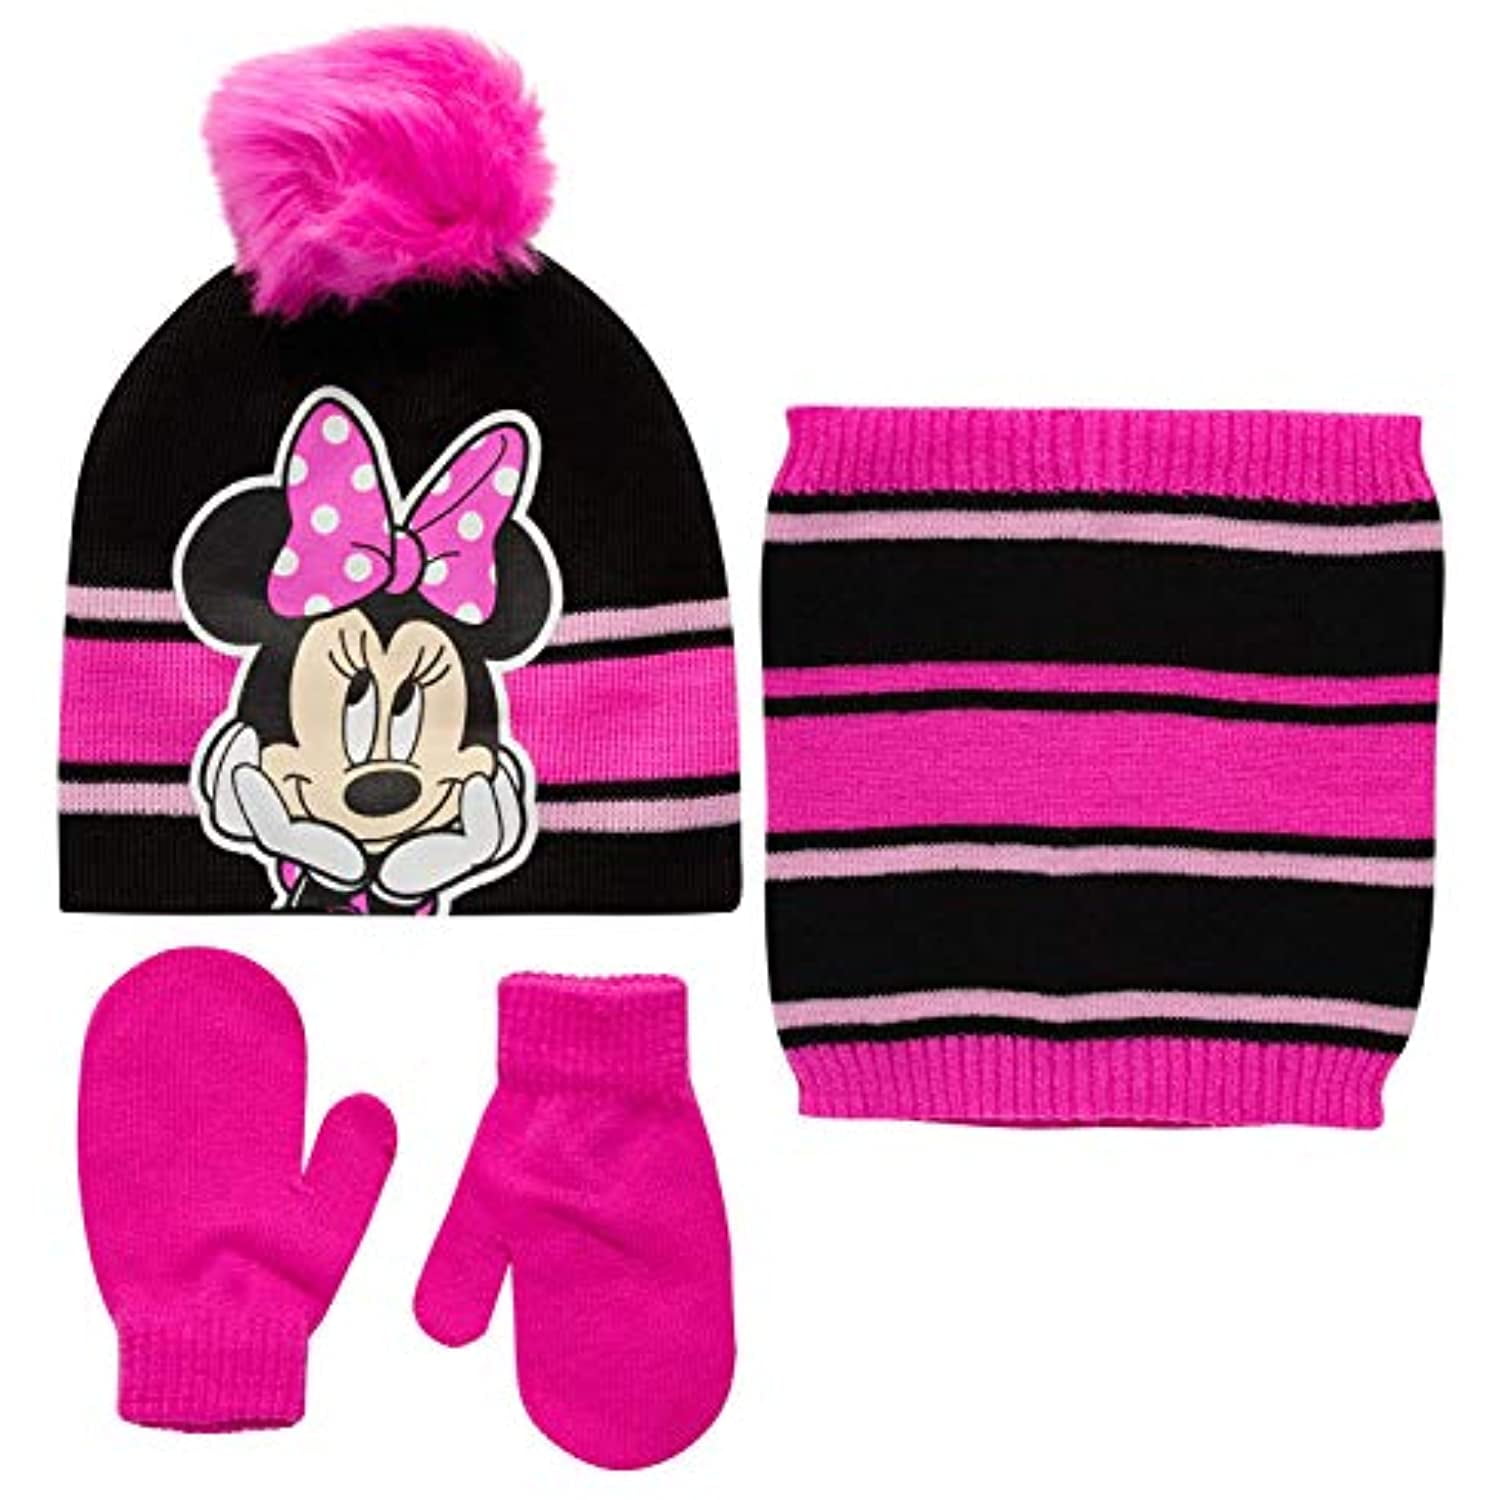 GIRL'S DISNEY MINNIE MOUSE WINTER  HAT & SCARF SET GOOD QUALITY